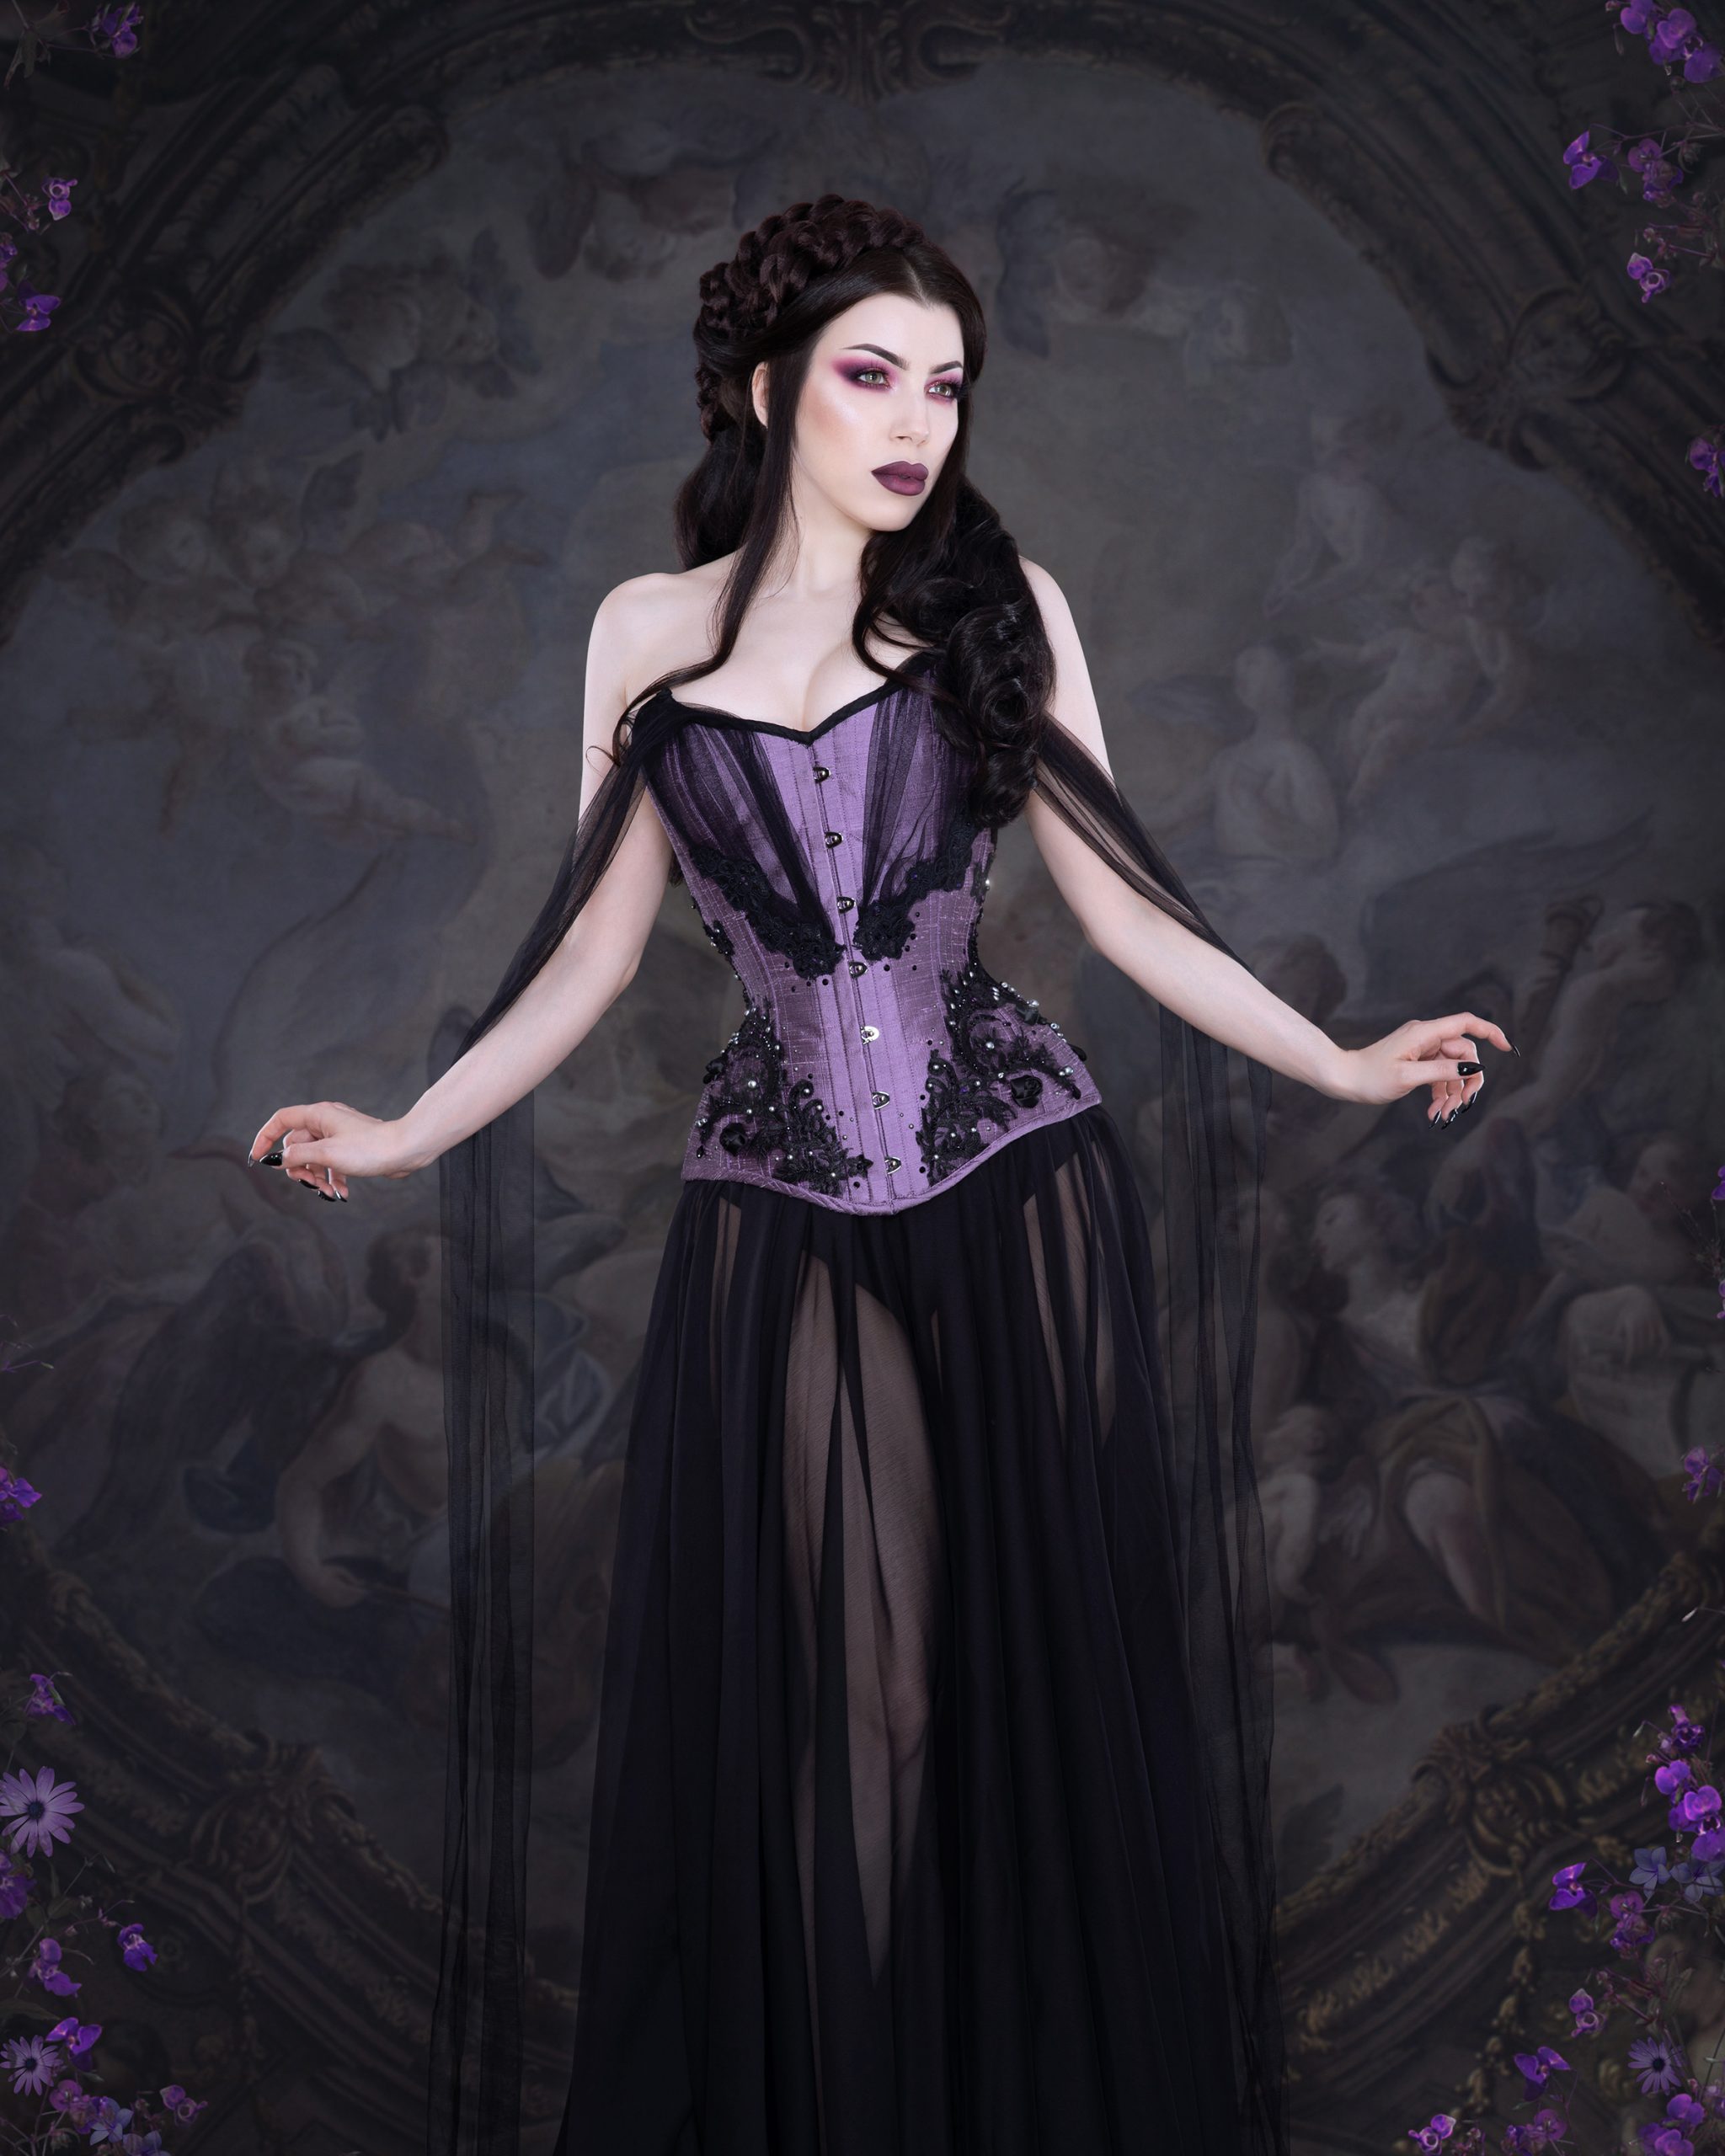 Purple Corsets & Bustiers for Women for sale